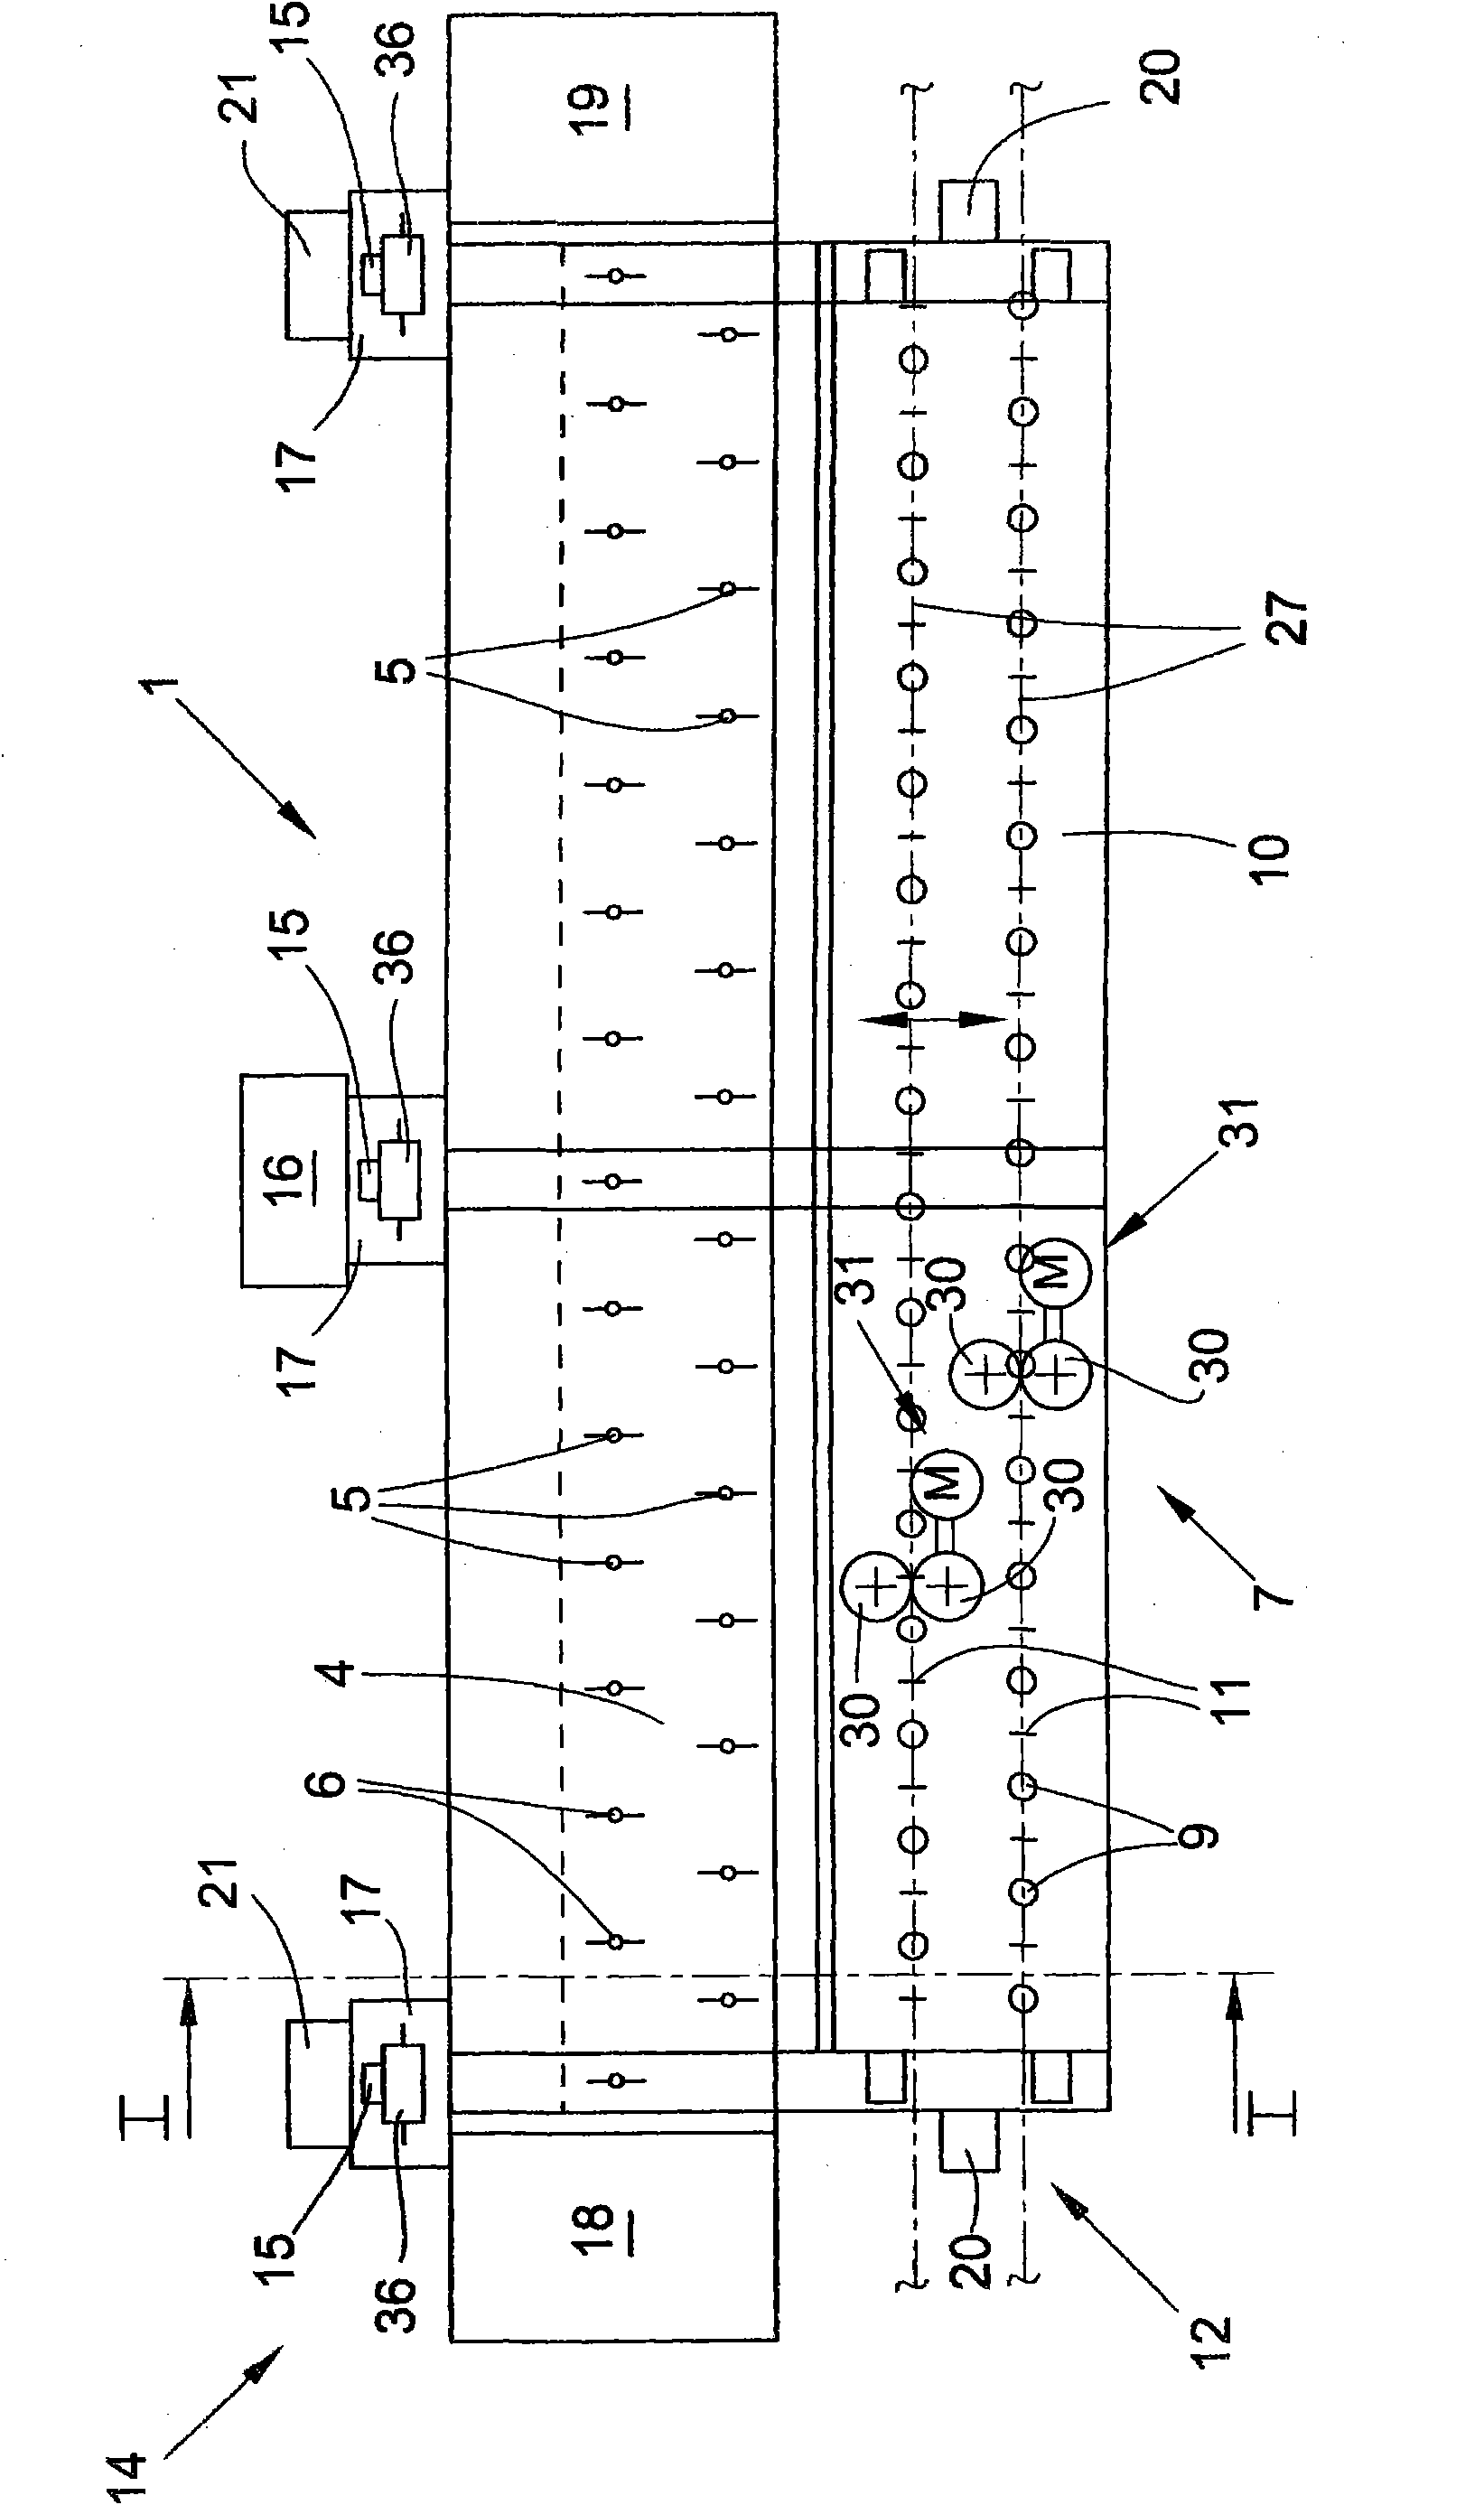 Reel change device for roving machine